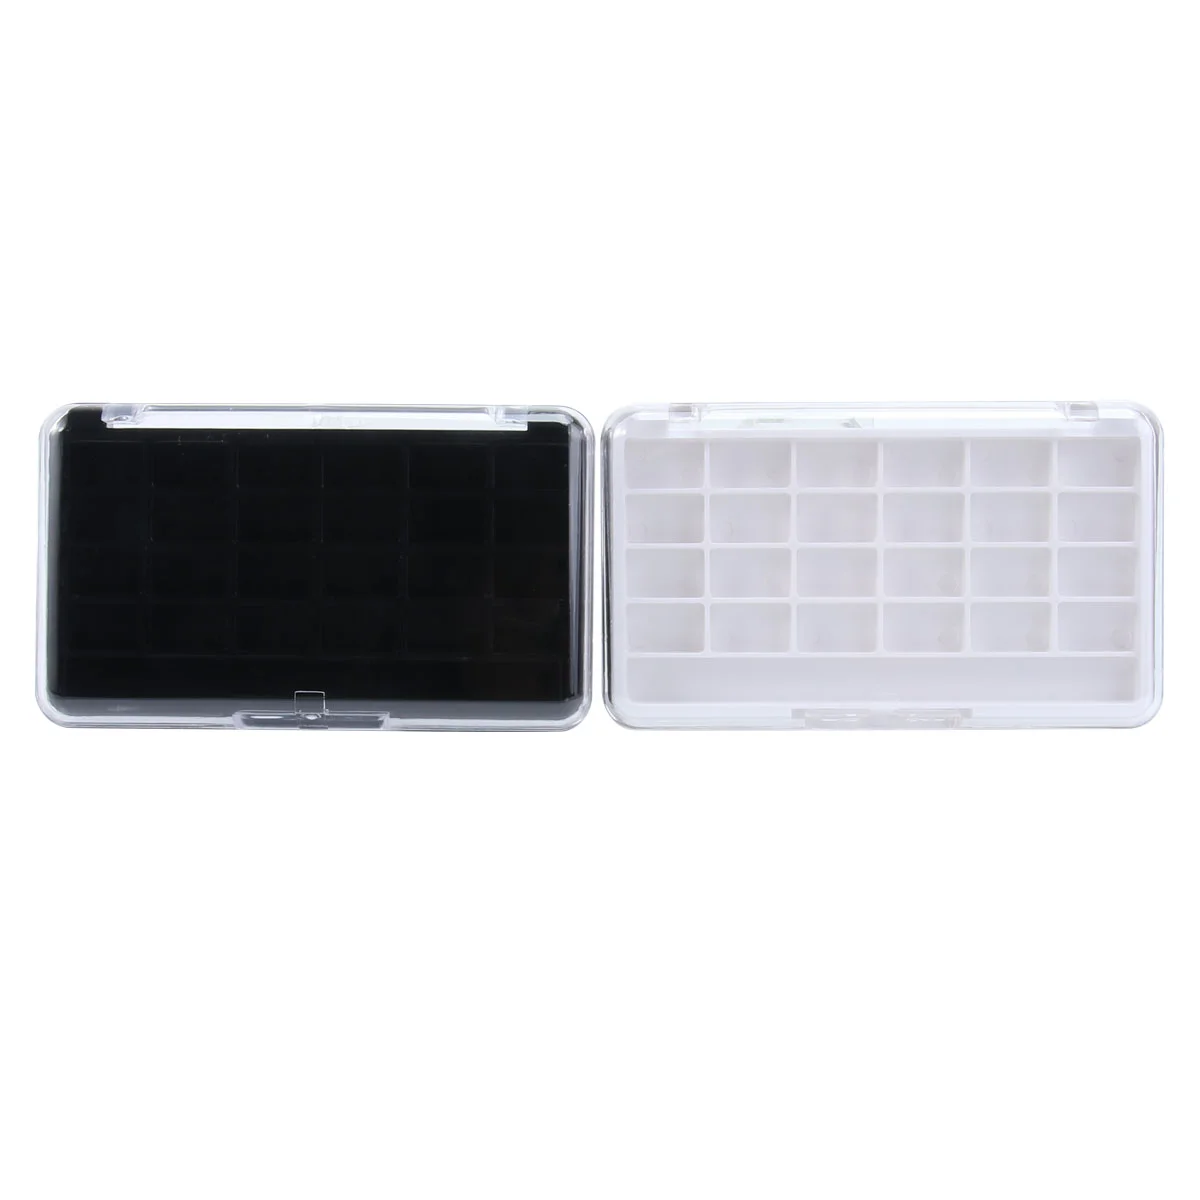 

Grids Empty Refillable Container Case Makeup Palette for Beauty Cosmetic Lipstick Lip Balm Eyeshadow Blusher White Black